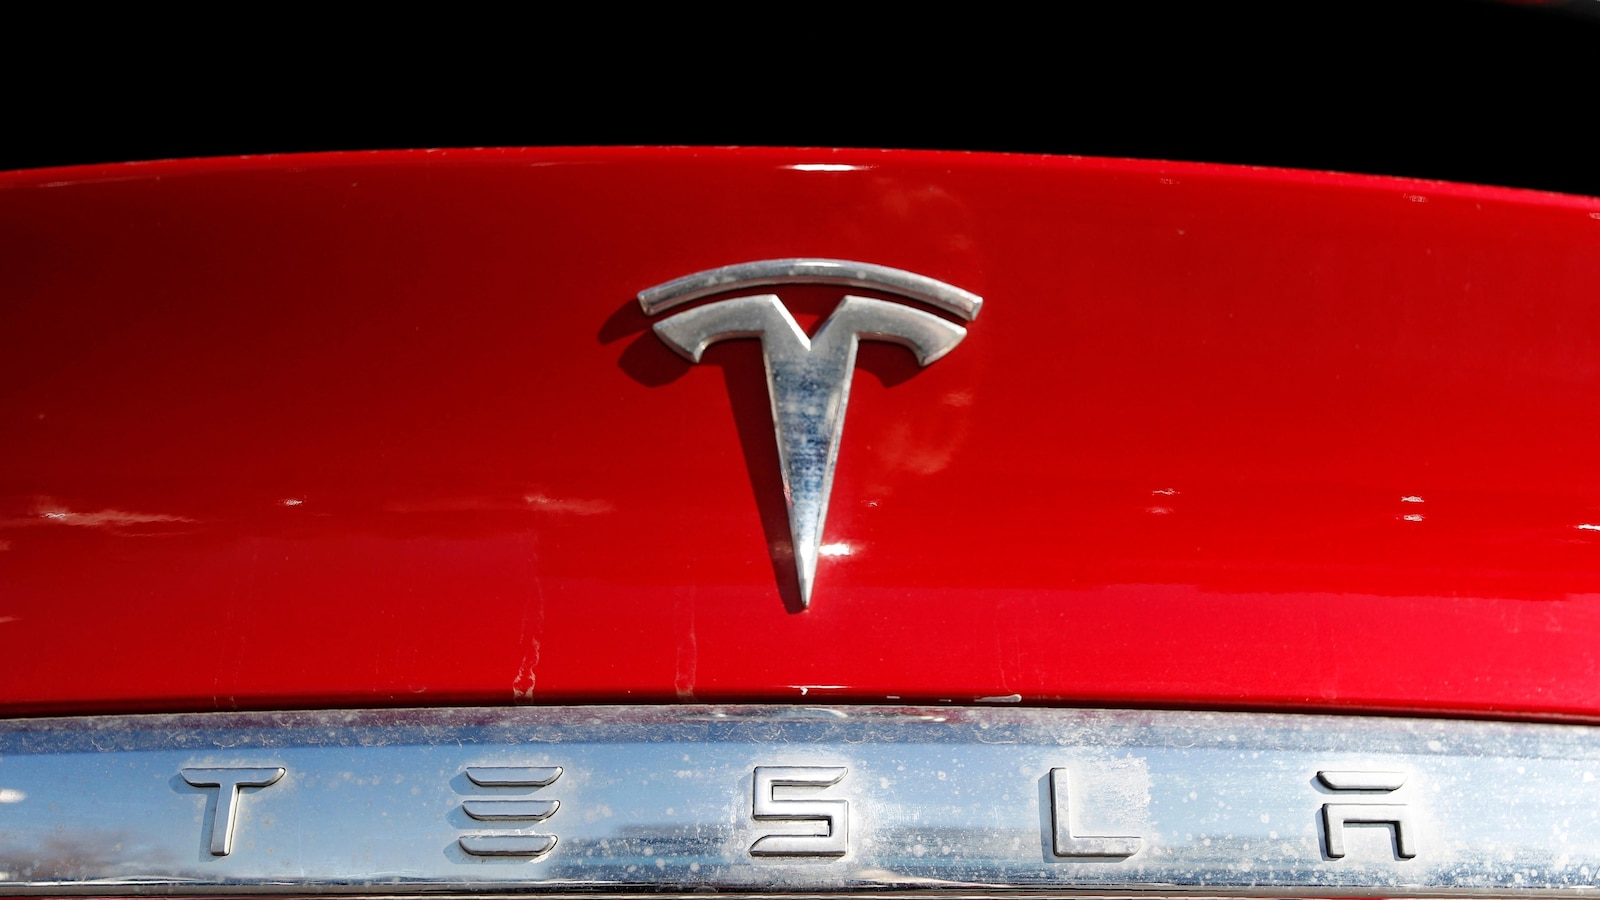 Tesla announces recall of approximately 2.2 million vehicles to address warning light issues through software update